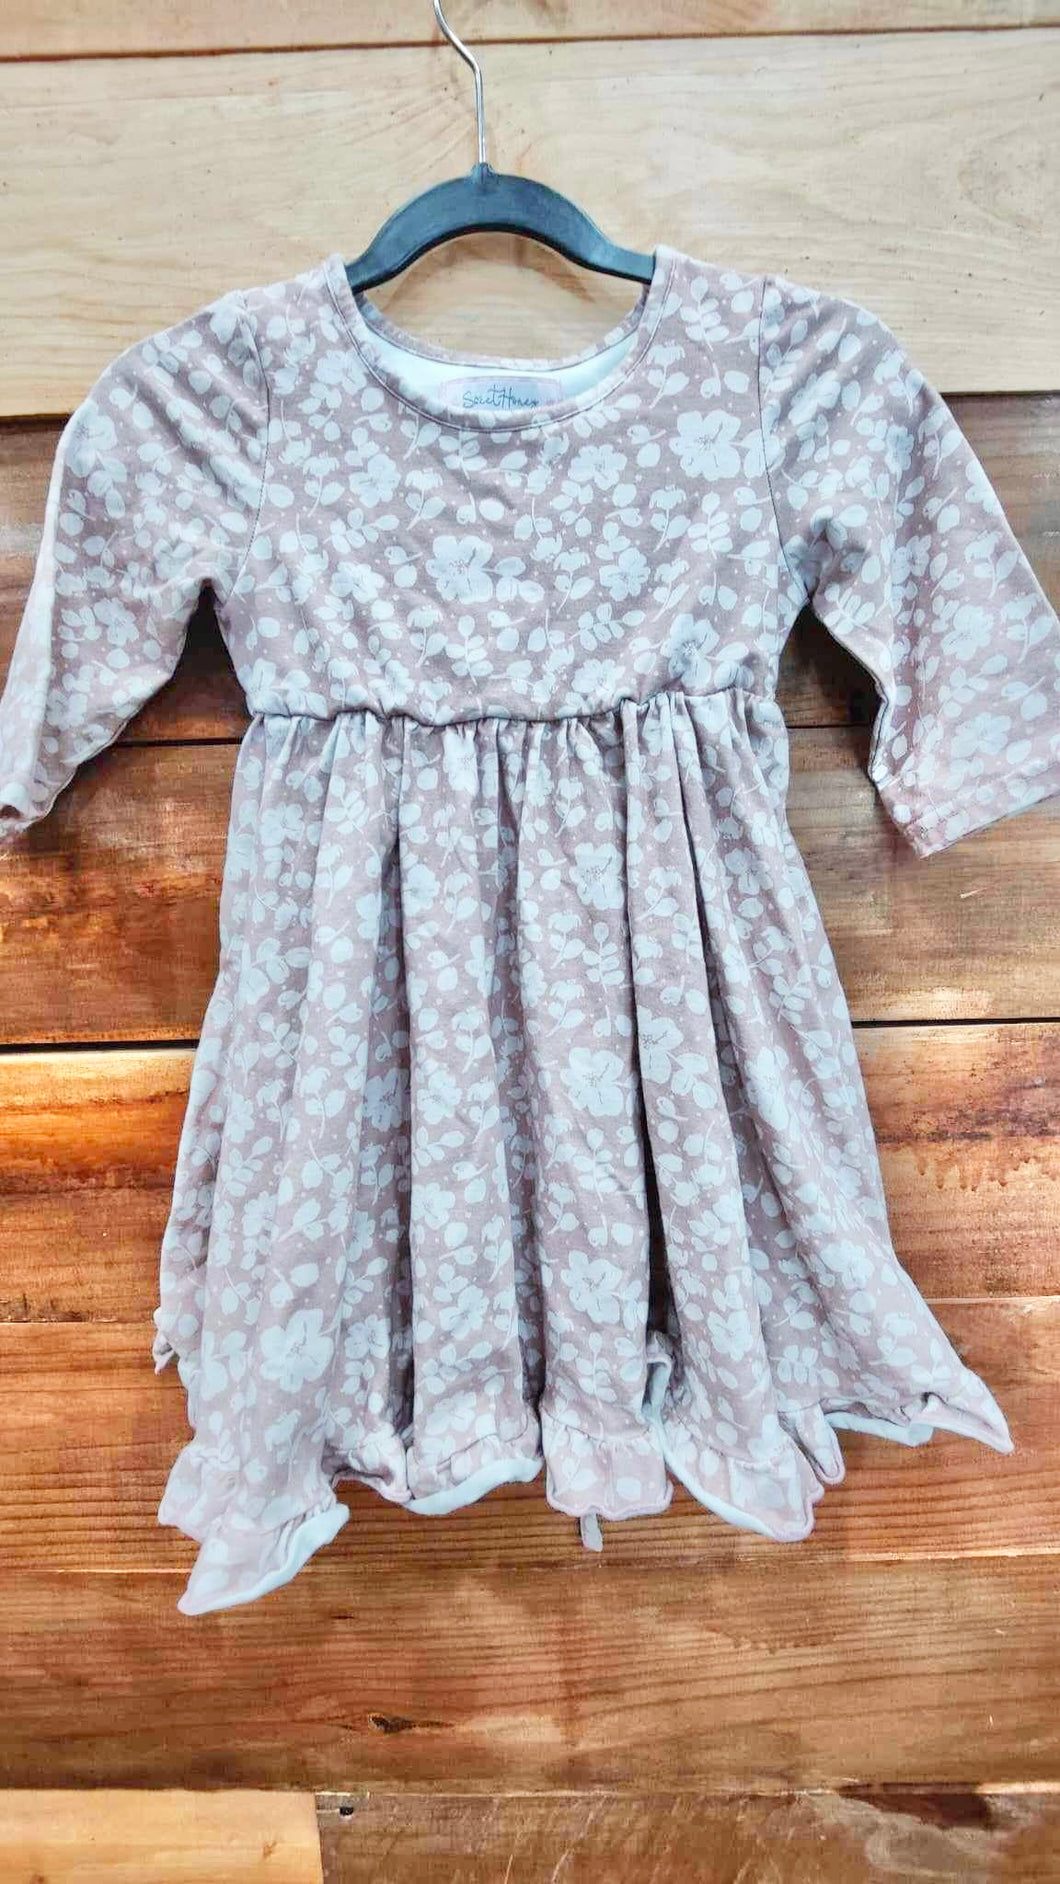 Sweethoney Floral Dress Size 4T